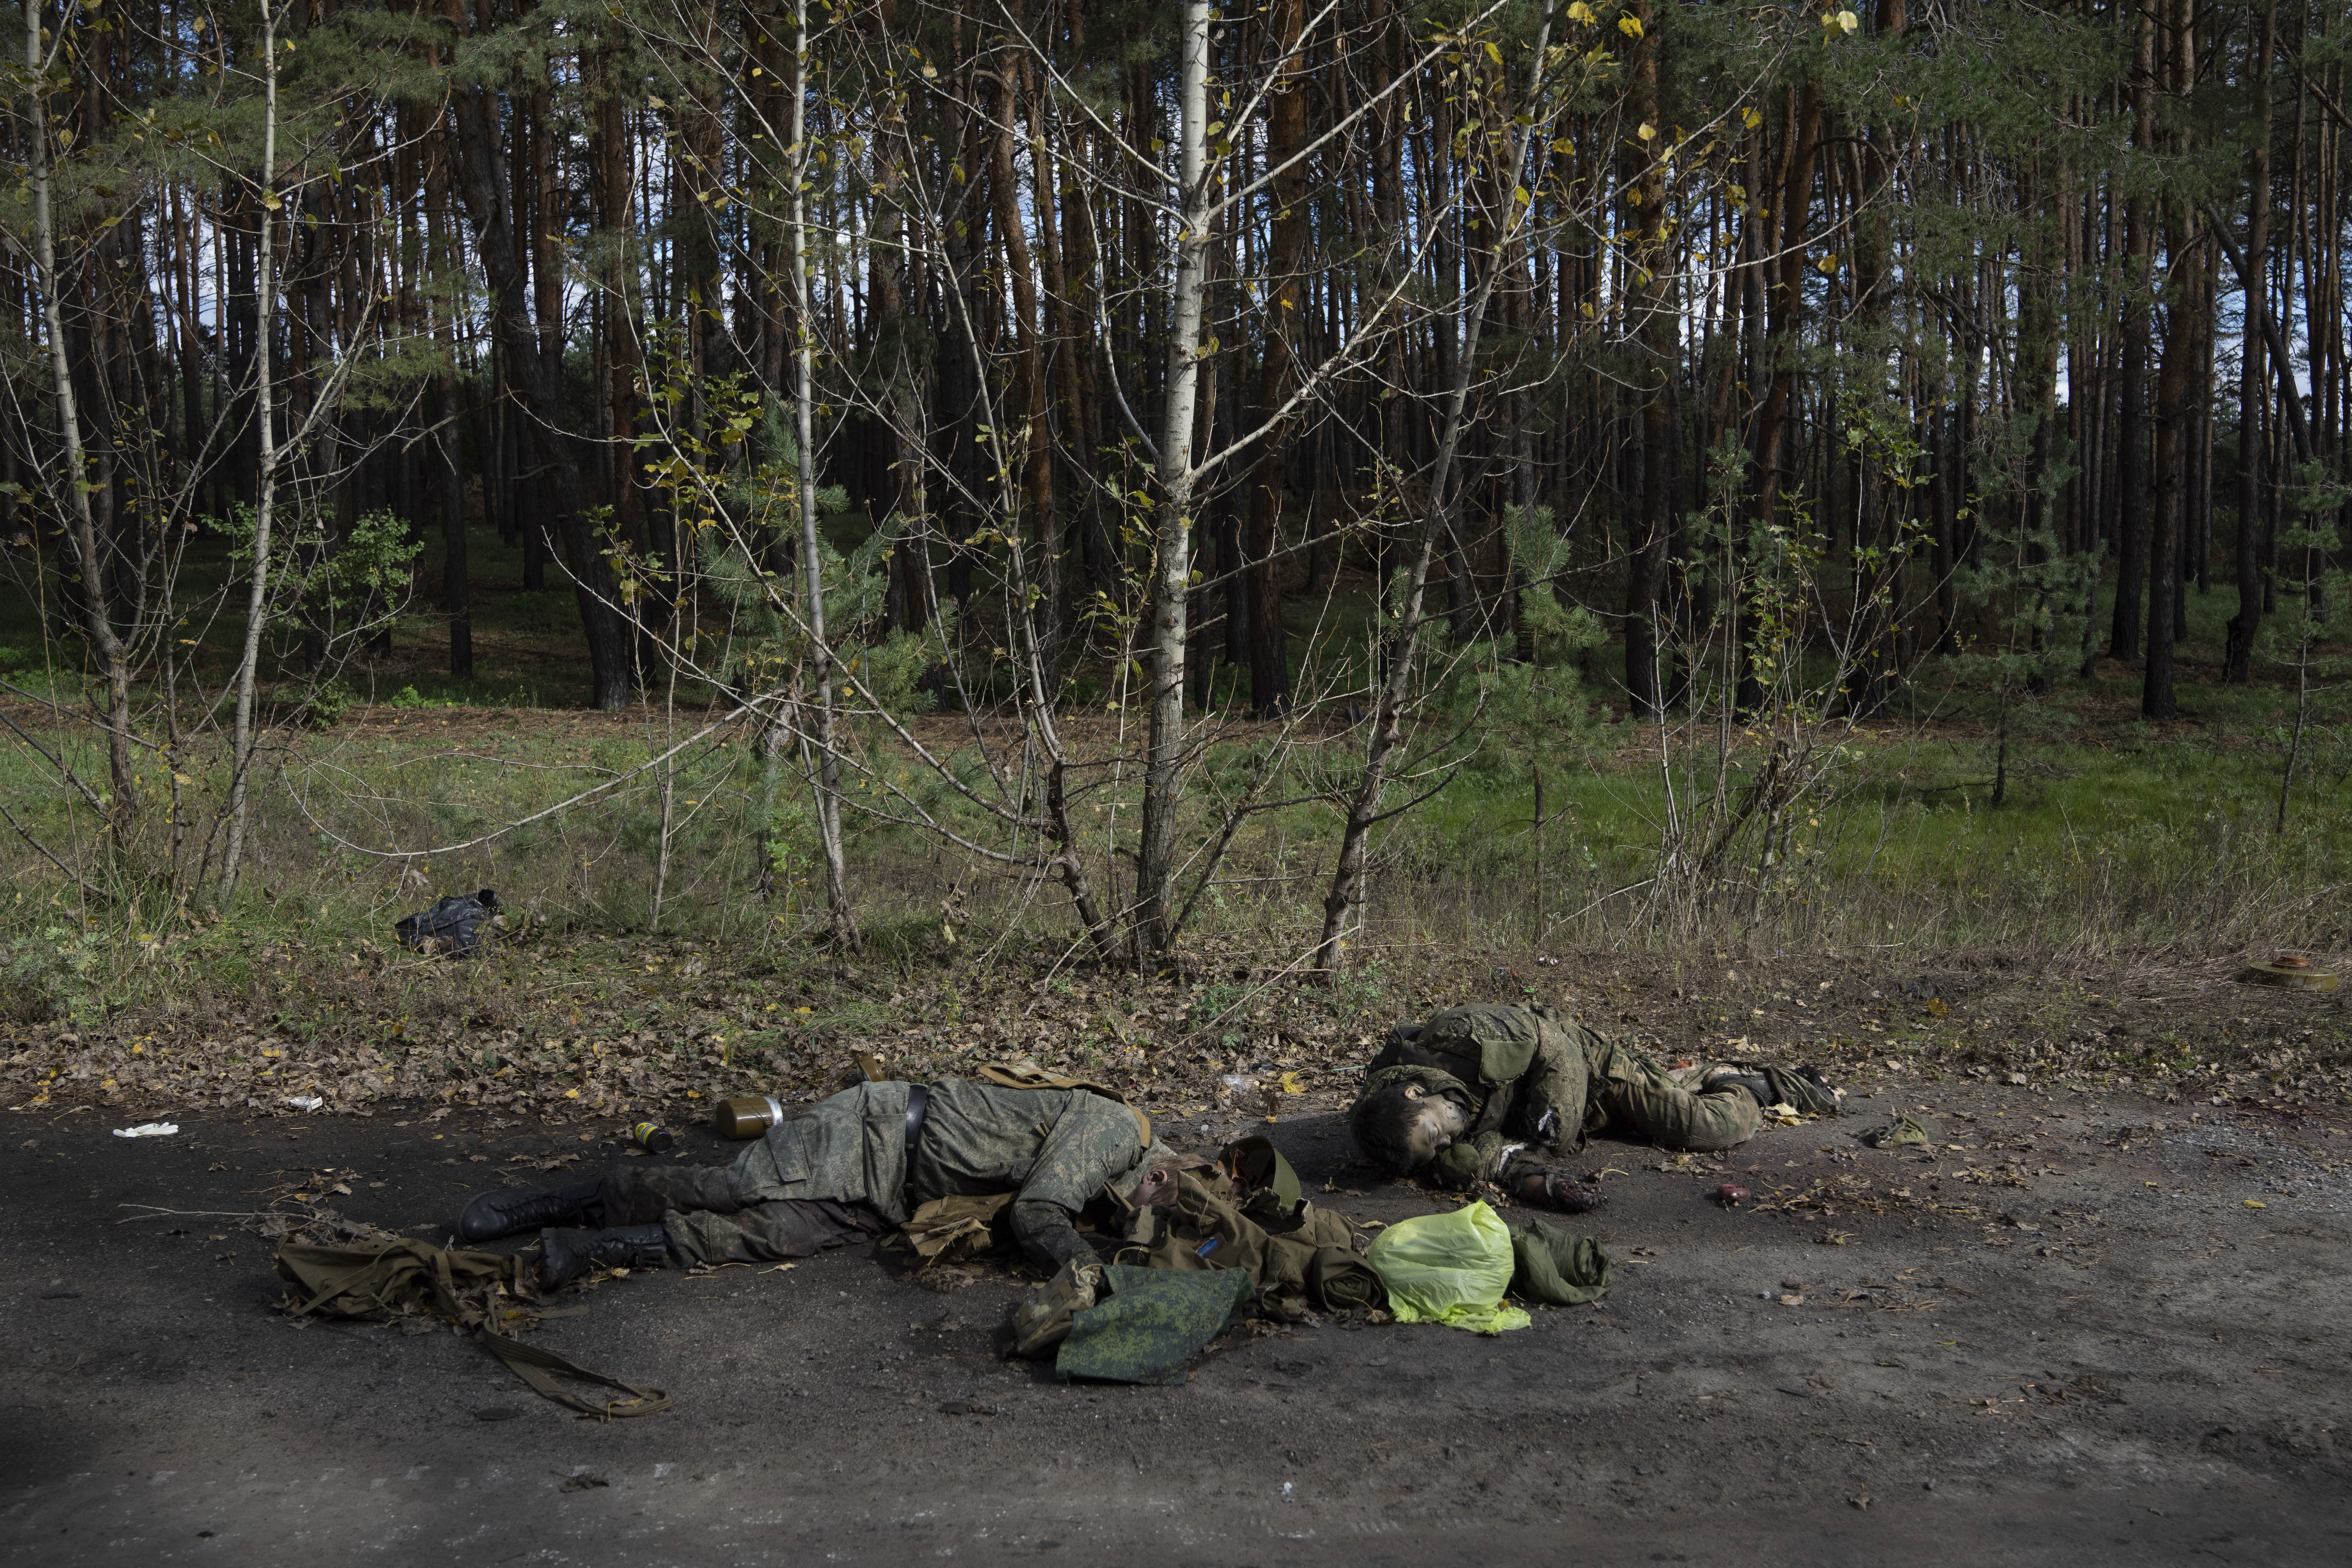 The Dead Are Evidence Of A Hasty Return That Marked A New Military Defeat For Moscow (Ap Photo/Evgeny Maloletka)